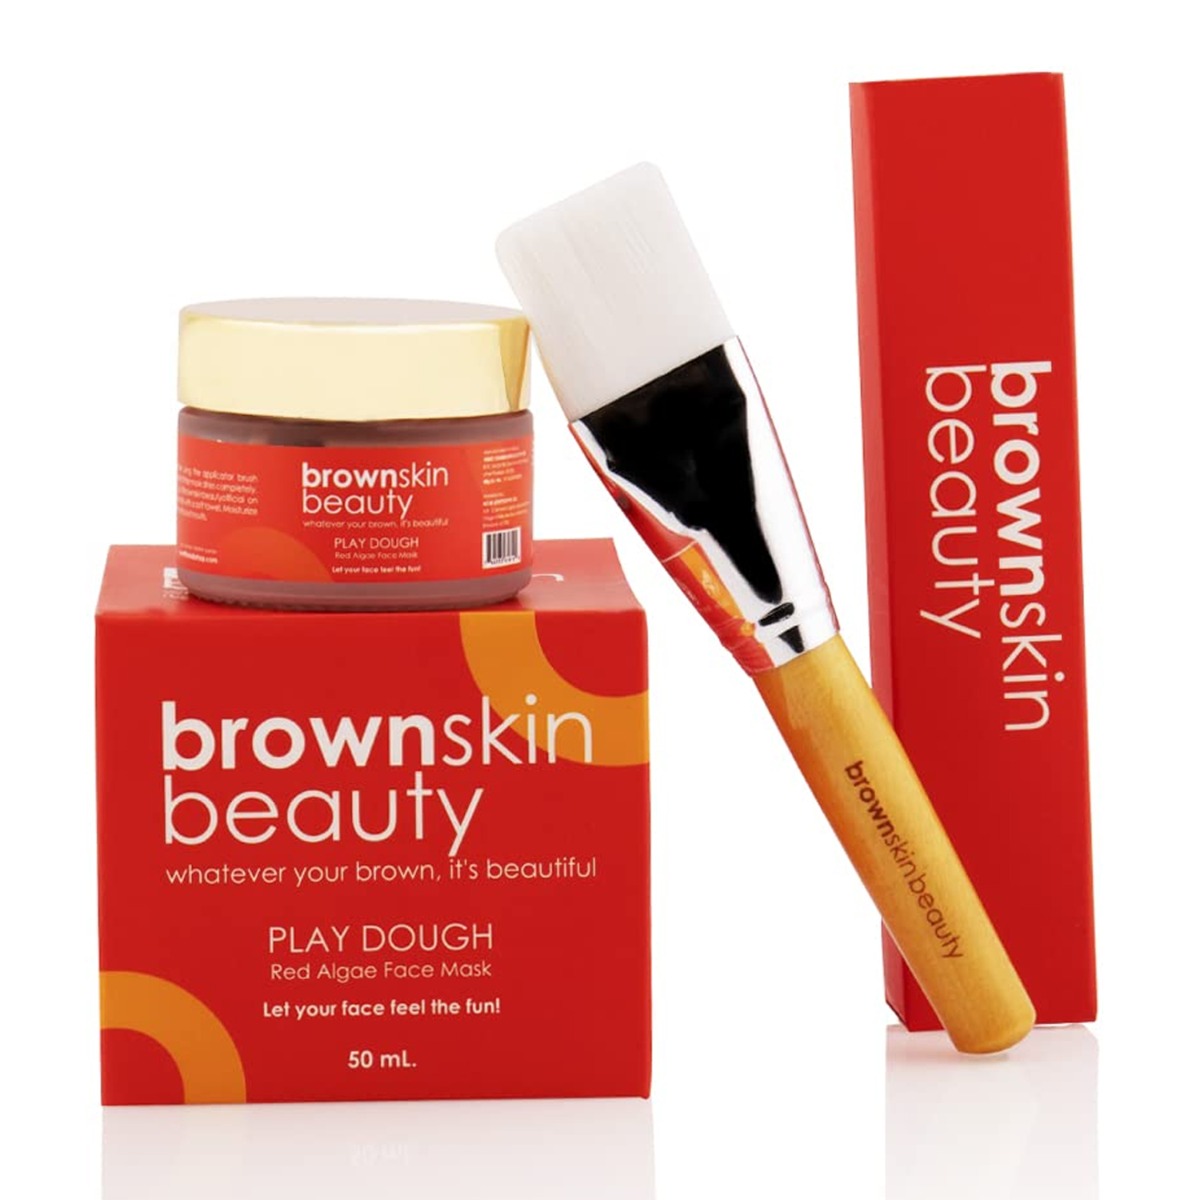  BrownSkin Beauty Play Dough Algae Face Mask, 50ml - With Free Applicator